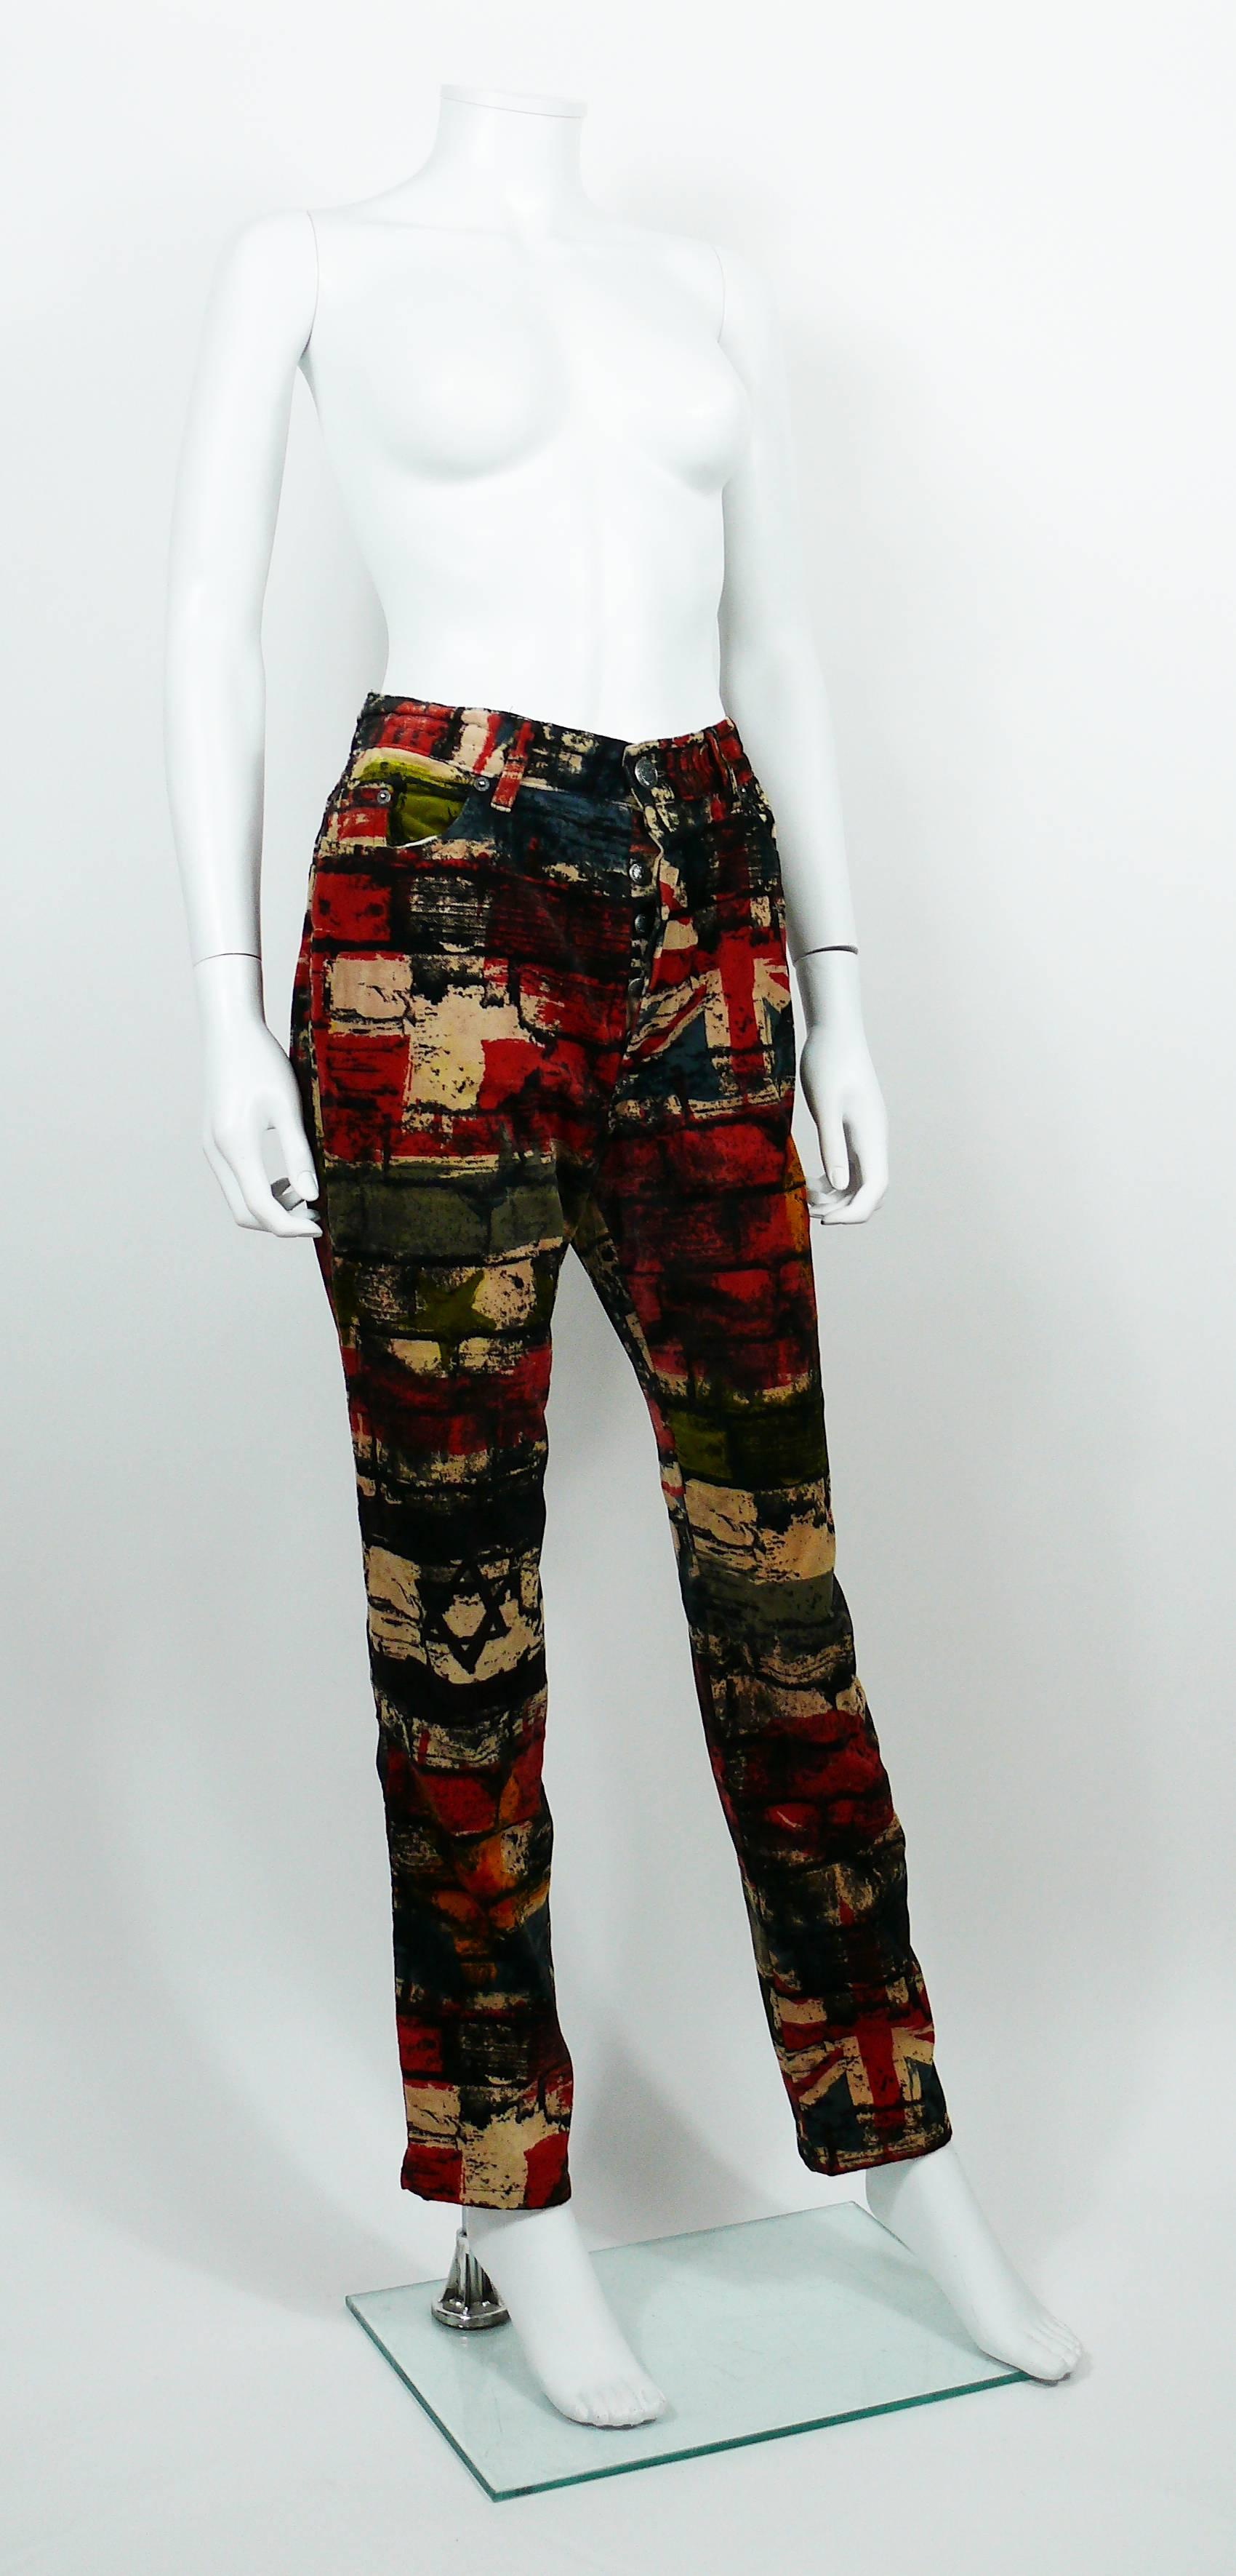 JEAN PAUL GAULTIER vintage pants trousers featuring a multi colored wall and flags print.

These trousers feature :
- Velvety touch material.
- Front buttoning.
- Front and back pockets.
- Belt loops and signature brand loop at the back.

Label